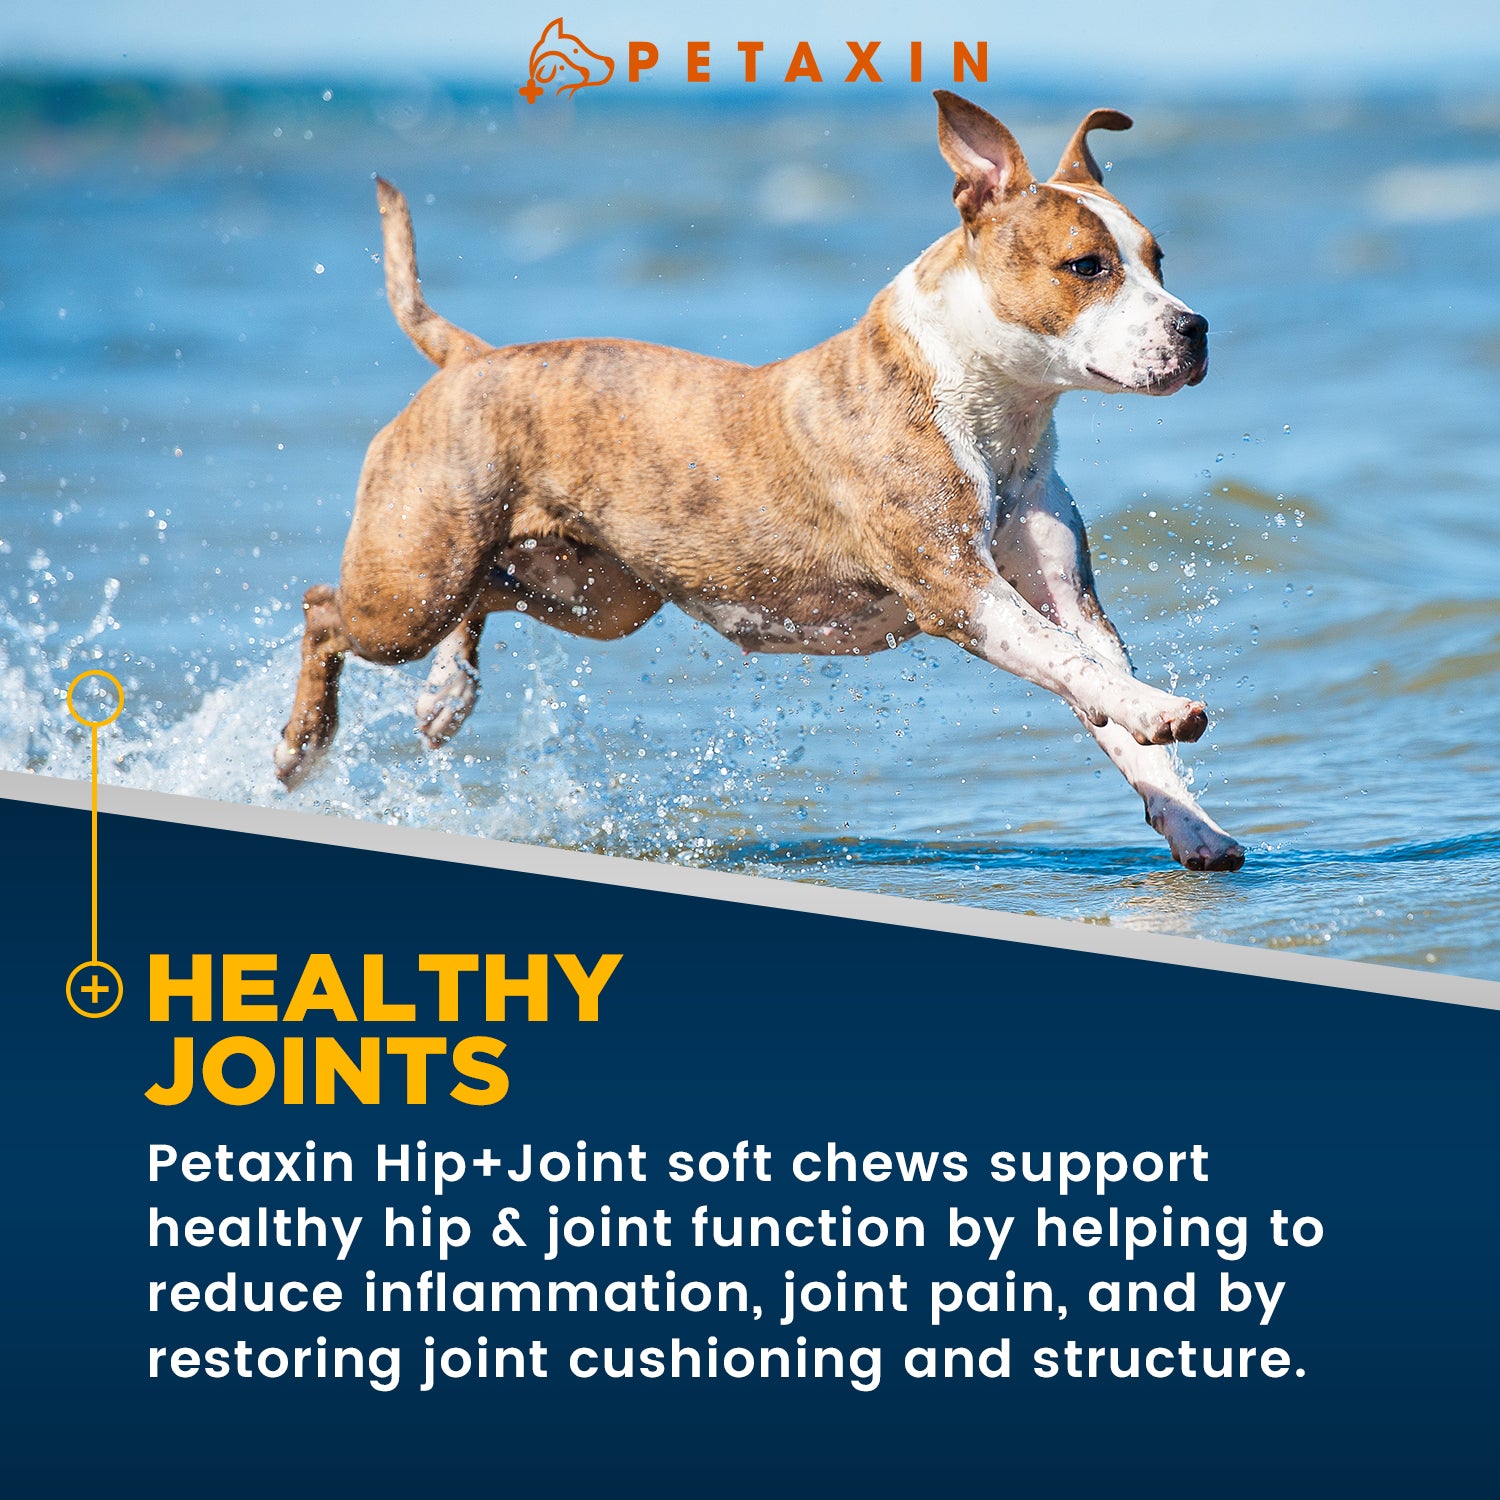 Petaxin Hip + Joint Support